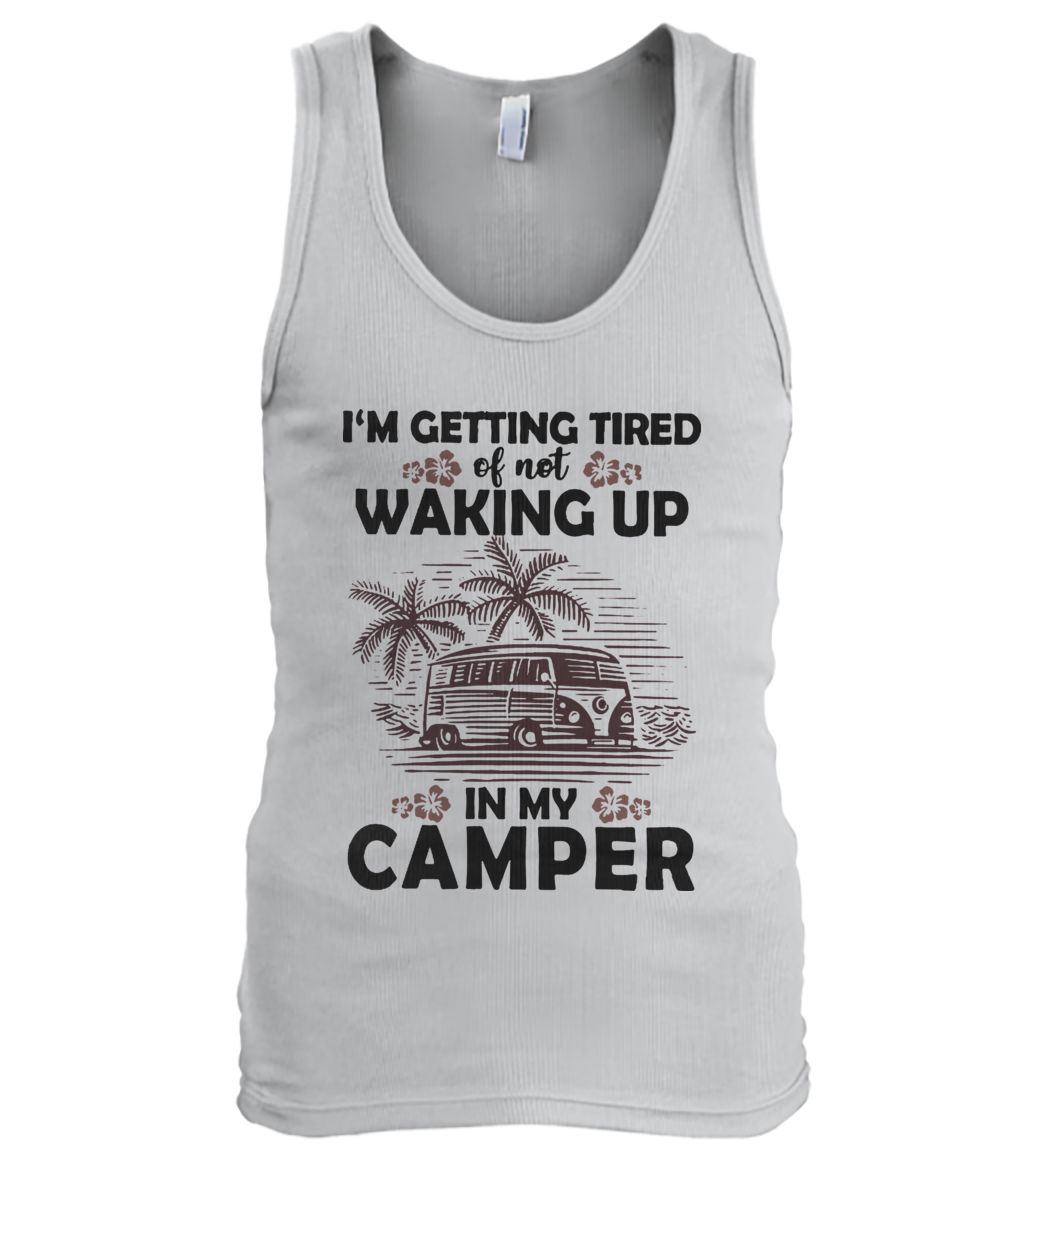 Camping I'm getting tired of not waking up in my camper men's tank top